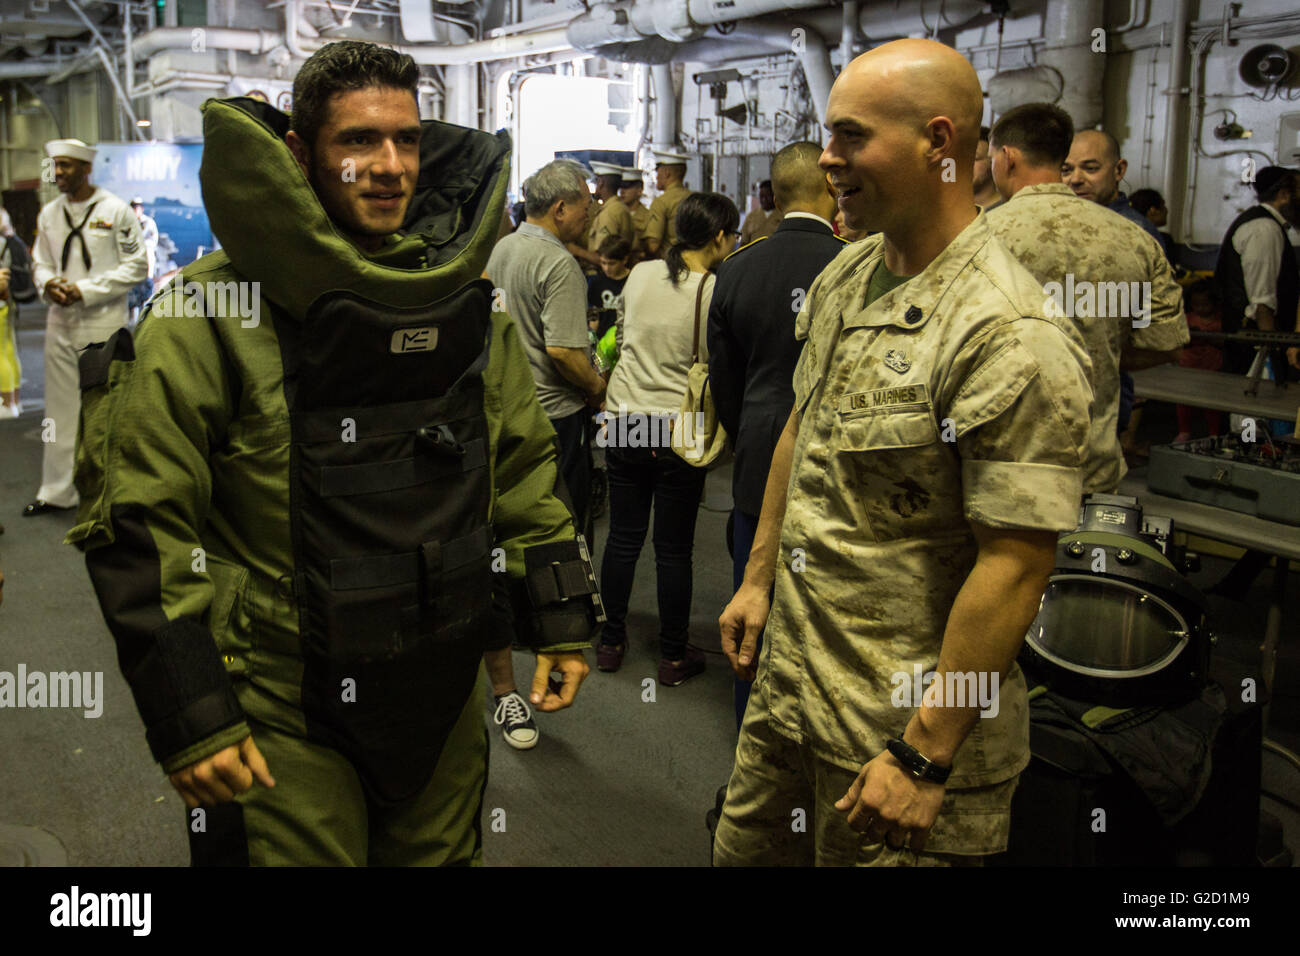 New York, USA. 27th May, 2016. New York, Annual New York Fleet Week in New York. 27th May, 2016. A visitor (L) tries on the Explosive Ordnance Disposal (EOD) suit on board the USS Bataan (LHD-5), Wasp-class amphibious assault ship, during the 28th Annual New York Fleet Week in New York, the United States on May 27, 2016. New York Fleet Week takes place from May 25 to May 30, where hundred of service men and women in the Armed Forces visit New York City as part of Memorial Day commemorations. Credit:  Li Muzi/Xinhua/Alamy Live News Stock Photo